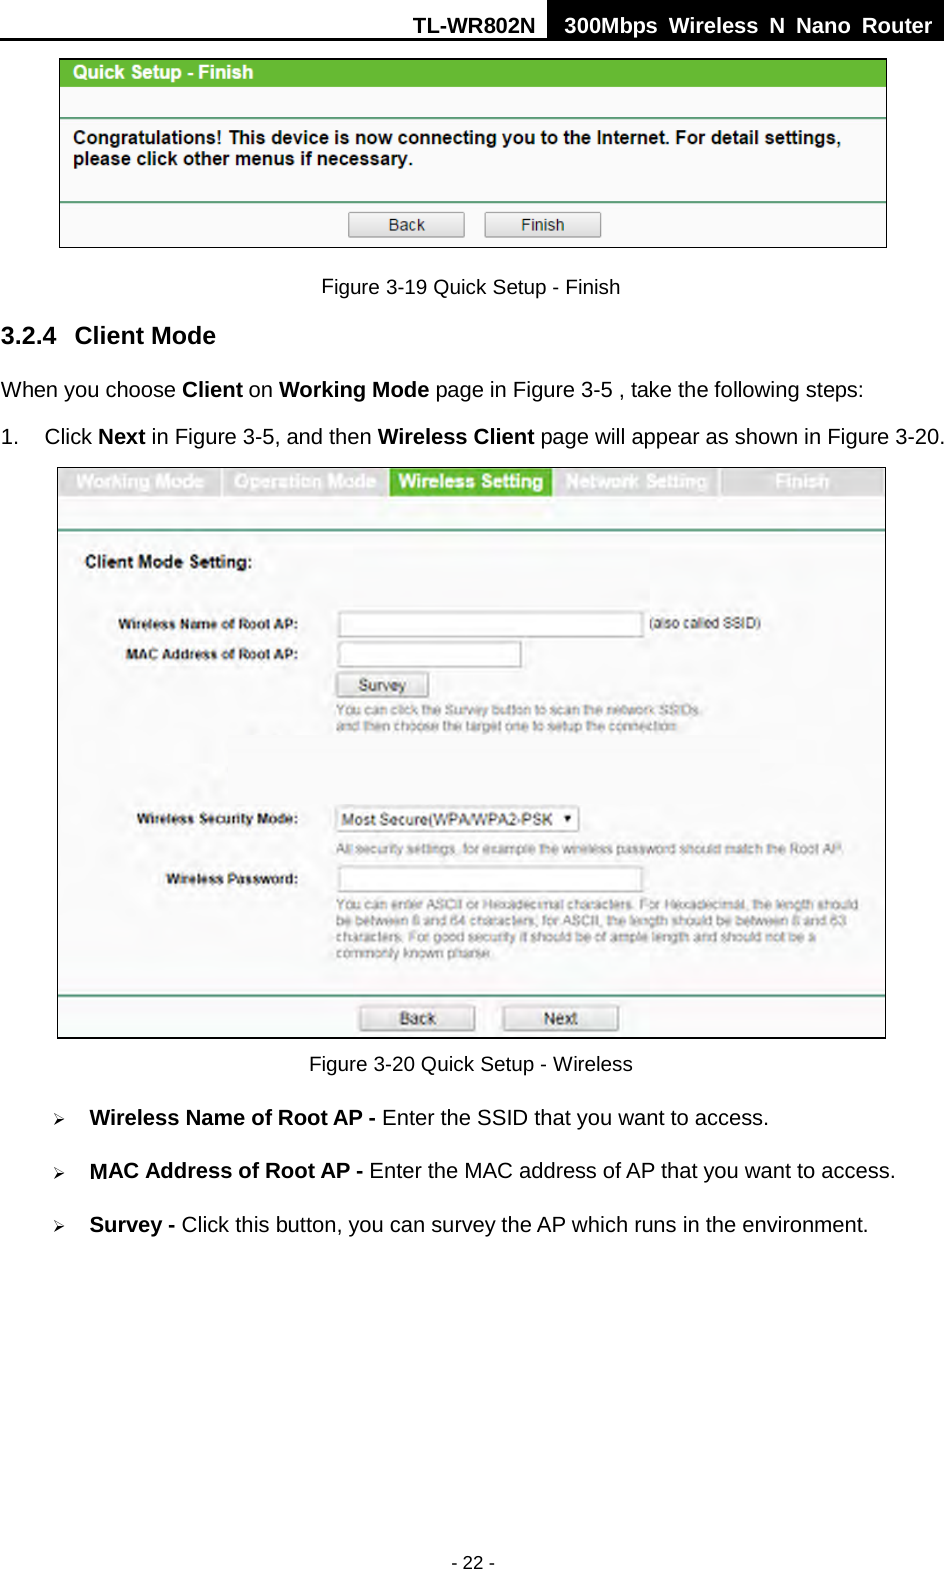 TL-WR802N  300Mbps Wireless N Nano Router   Figure 3-19 Quick Setup - Finish 3.2.4 Client Mode When you choose Client on Working Mode page in Figure 3-5 , take the following steps: 1.  Click Next in Figure 3-5, and then Wireless Client page will appear as shown in Figure 3-20.    Figure 3-20 Quick Setup - Wireless  Wireless Name of Root AP - Enter the SSID that you want to access.  MAC Address of Root AP - Enter the MAC address of AP that you want to access.  Survey - Click this button, you can survey the AP which runs in the environment. - 22 - 